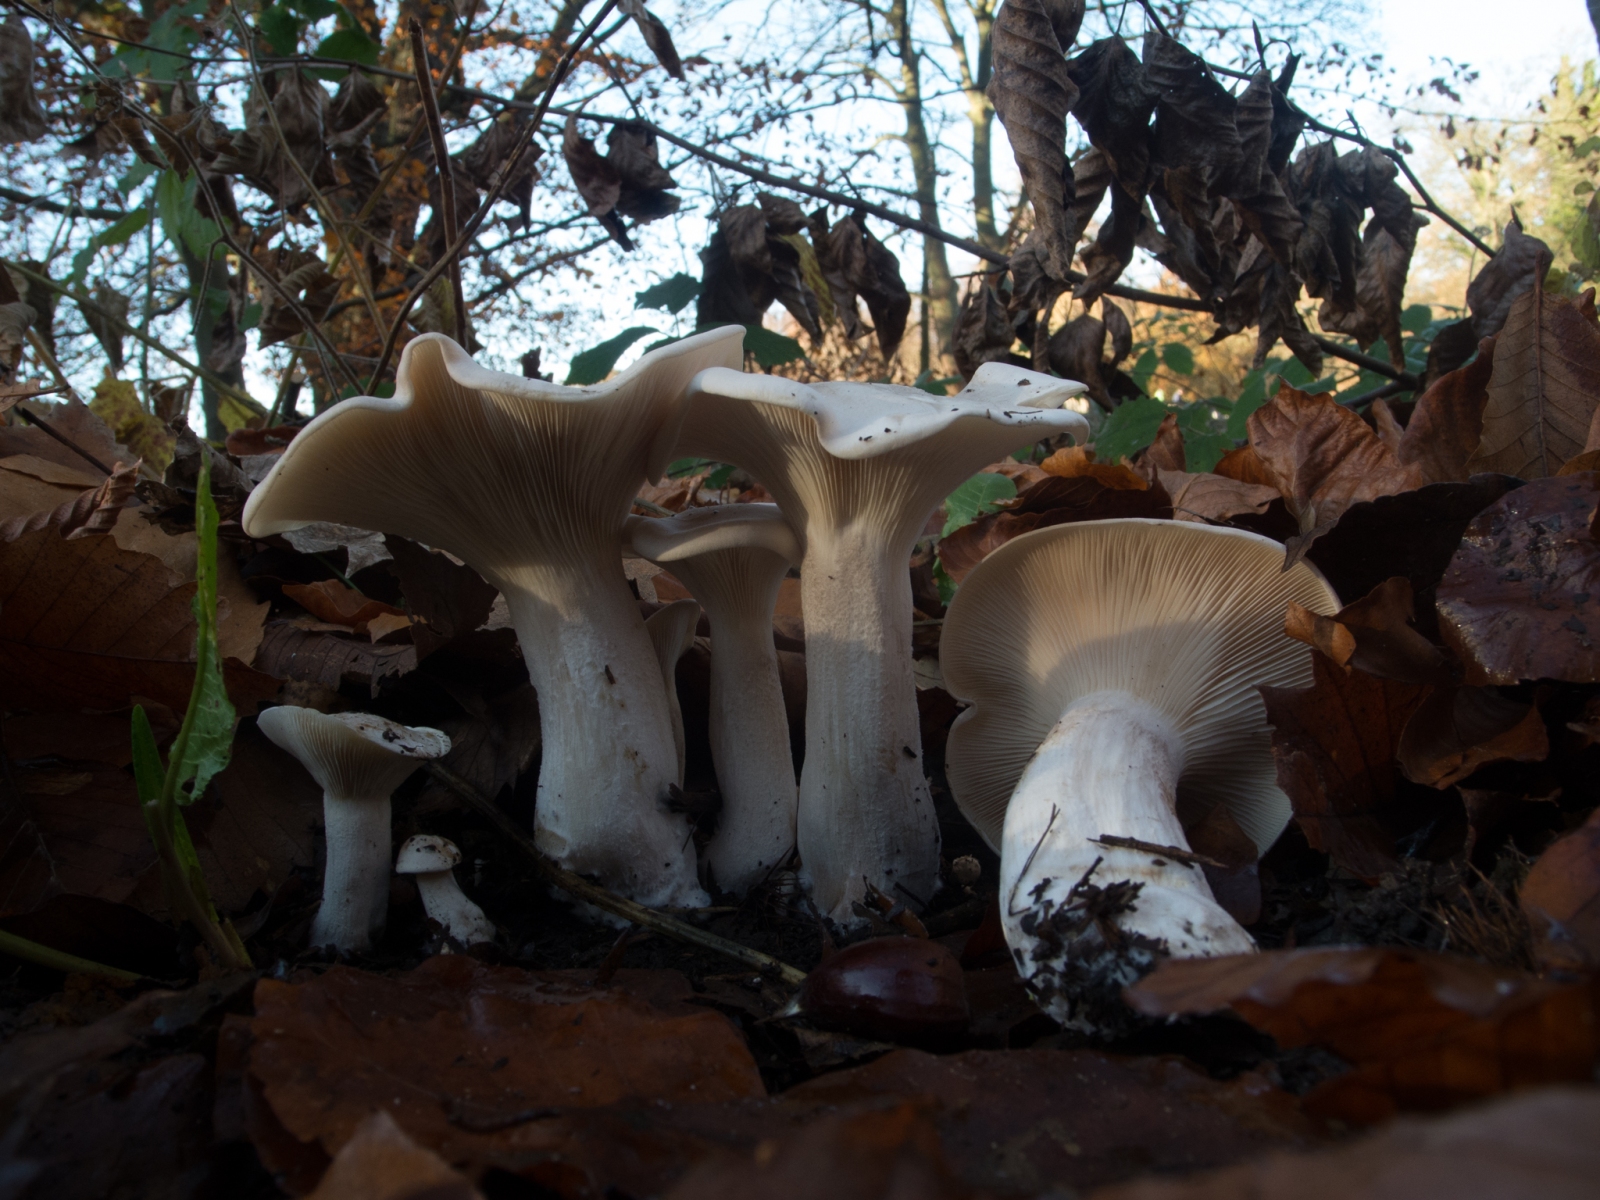 Clitocybe dealbata - Ivory Funnel, Clumber Park, Notts.